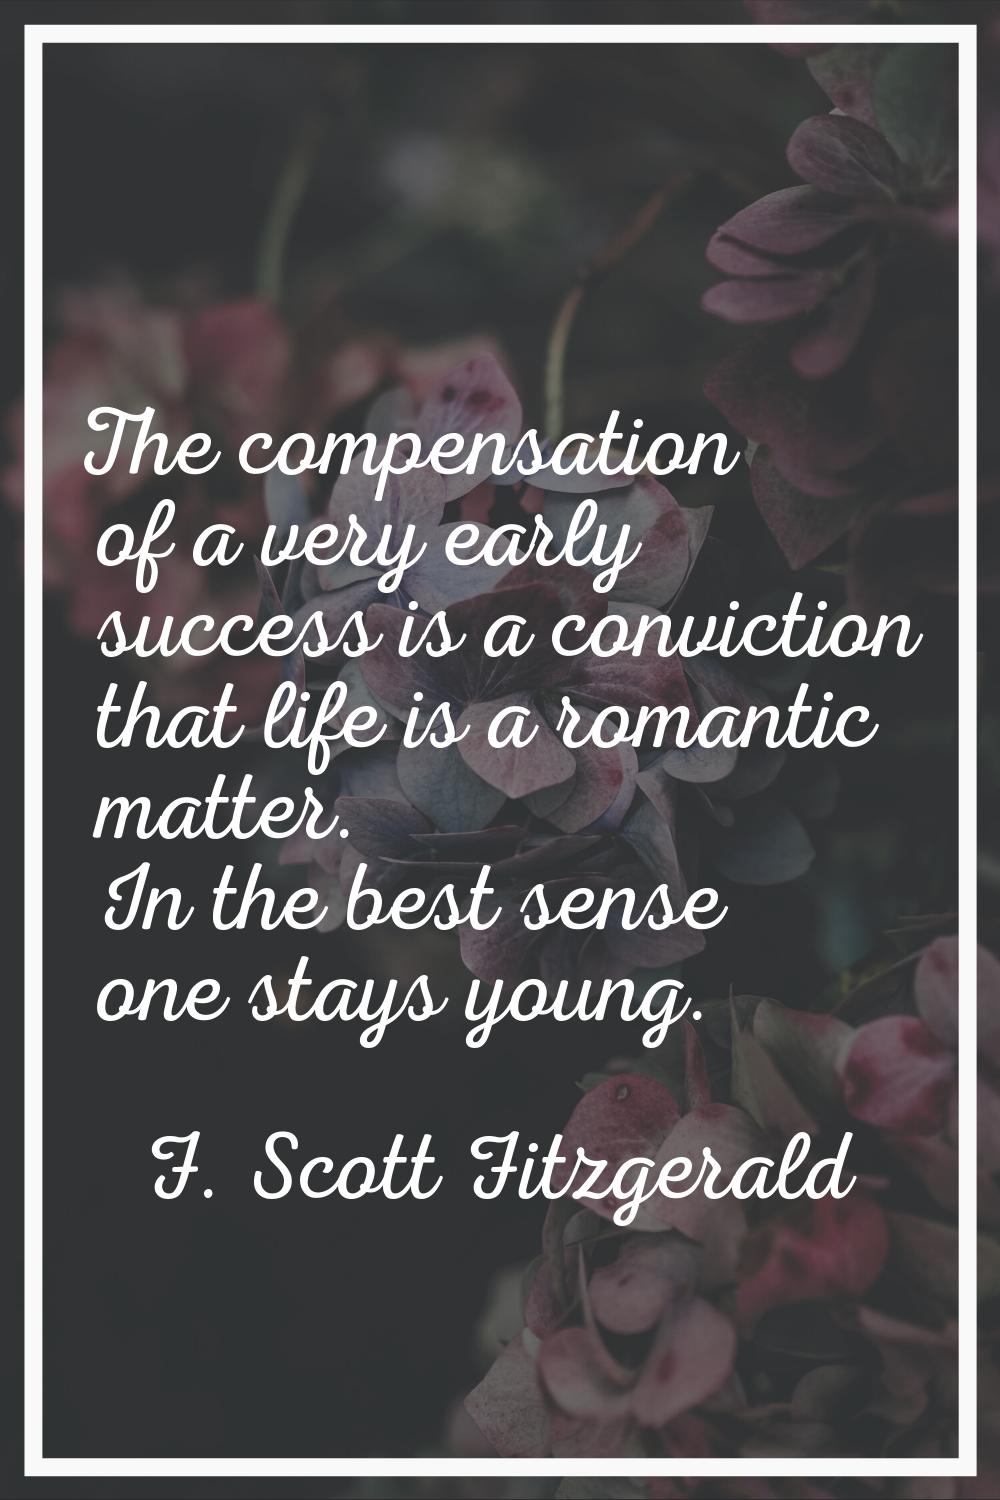 The compensation of a very early success is a conviction that life is a romantic matter. In the bes